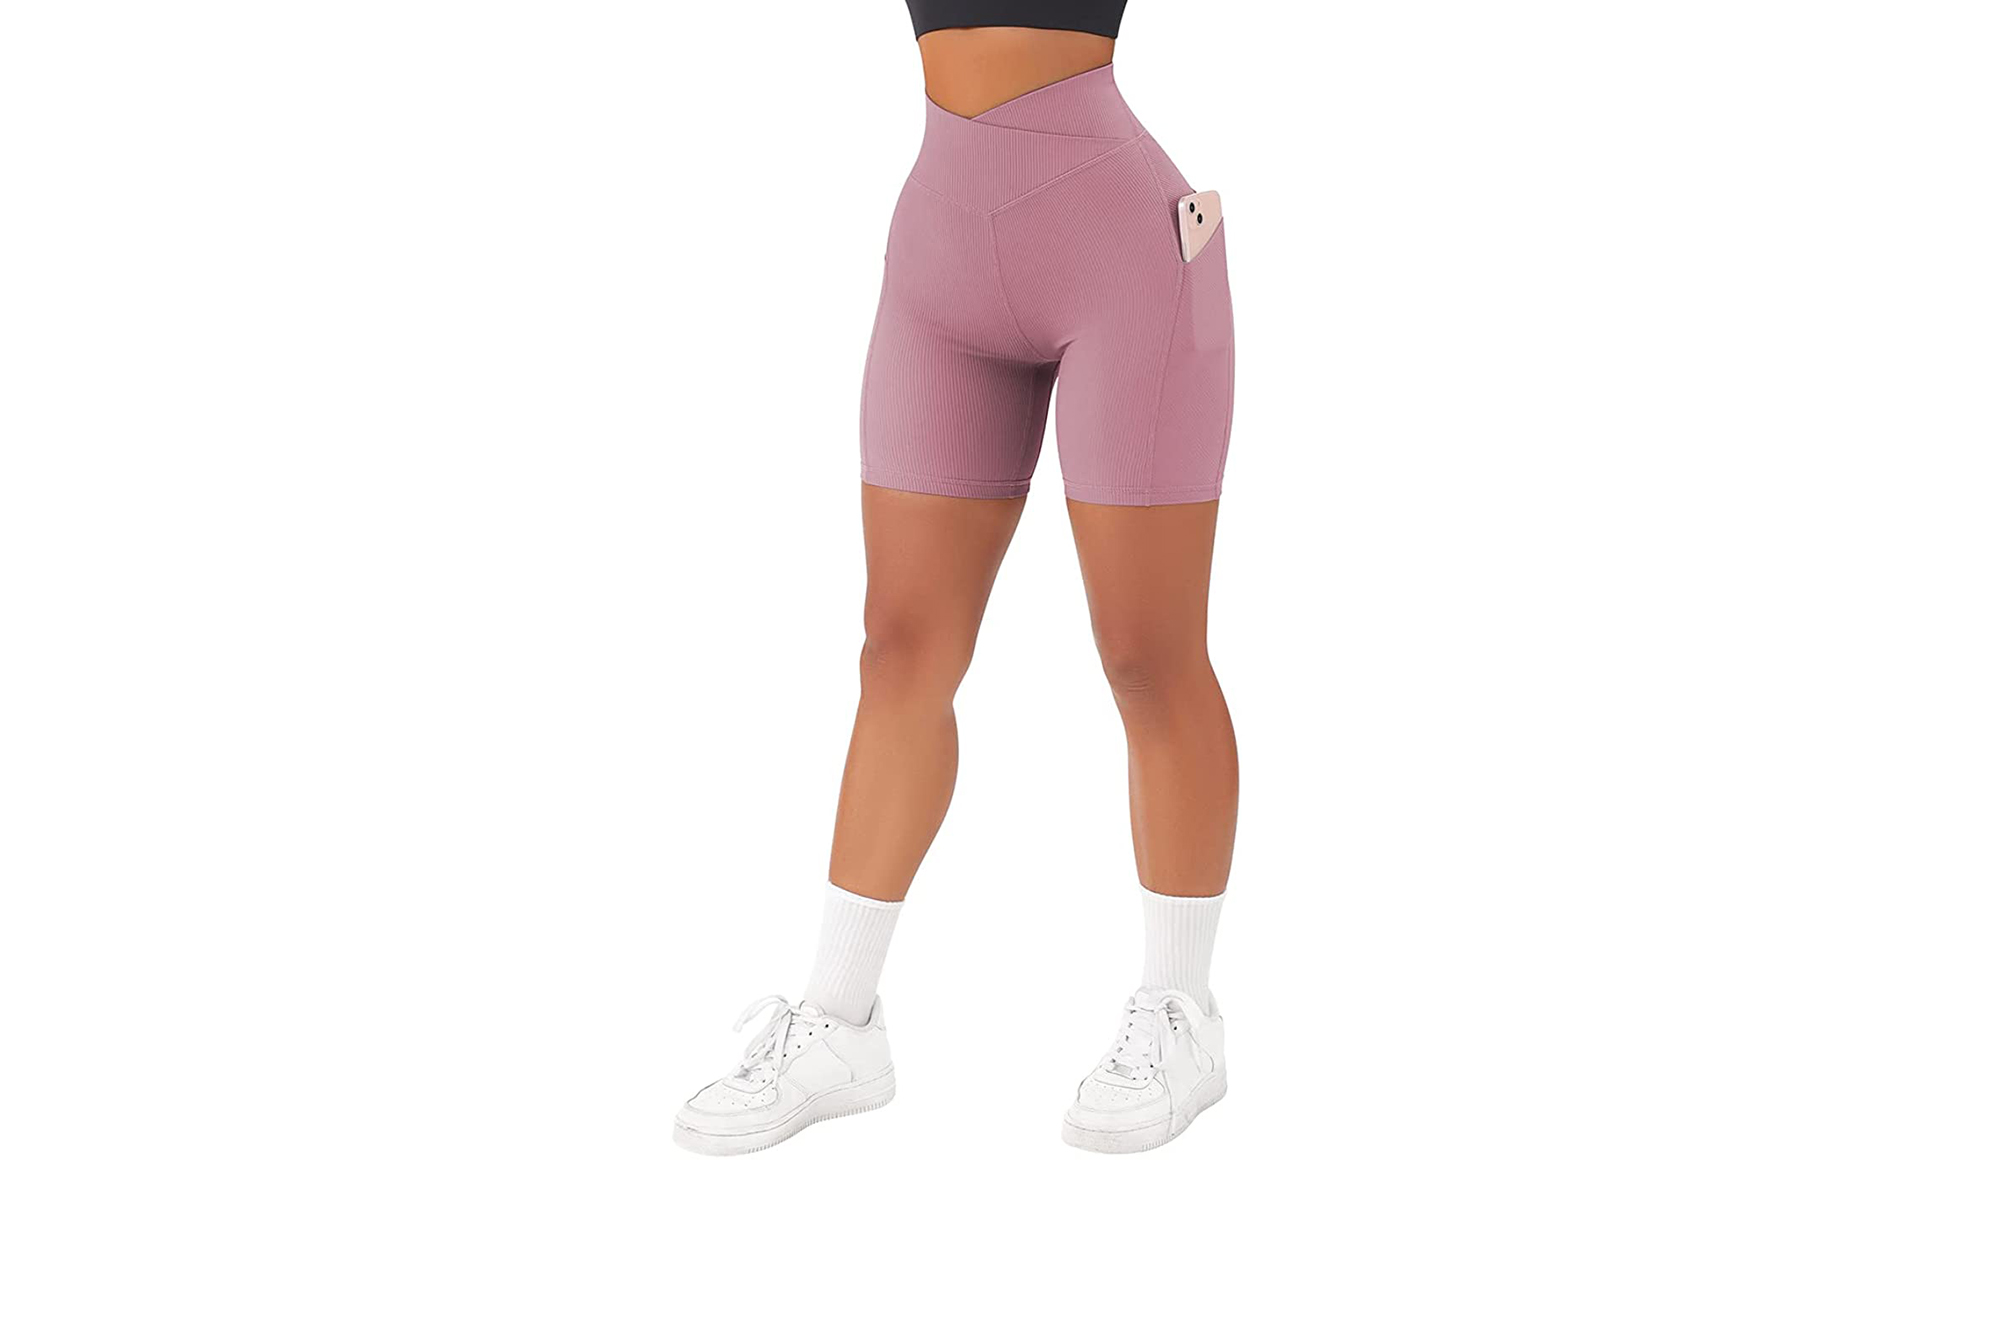 Women's Sexy Workout Shorts Butt Lifting Sports Leggings Athletic